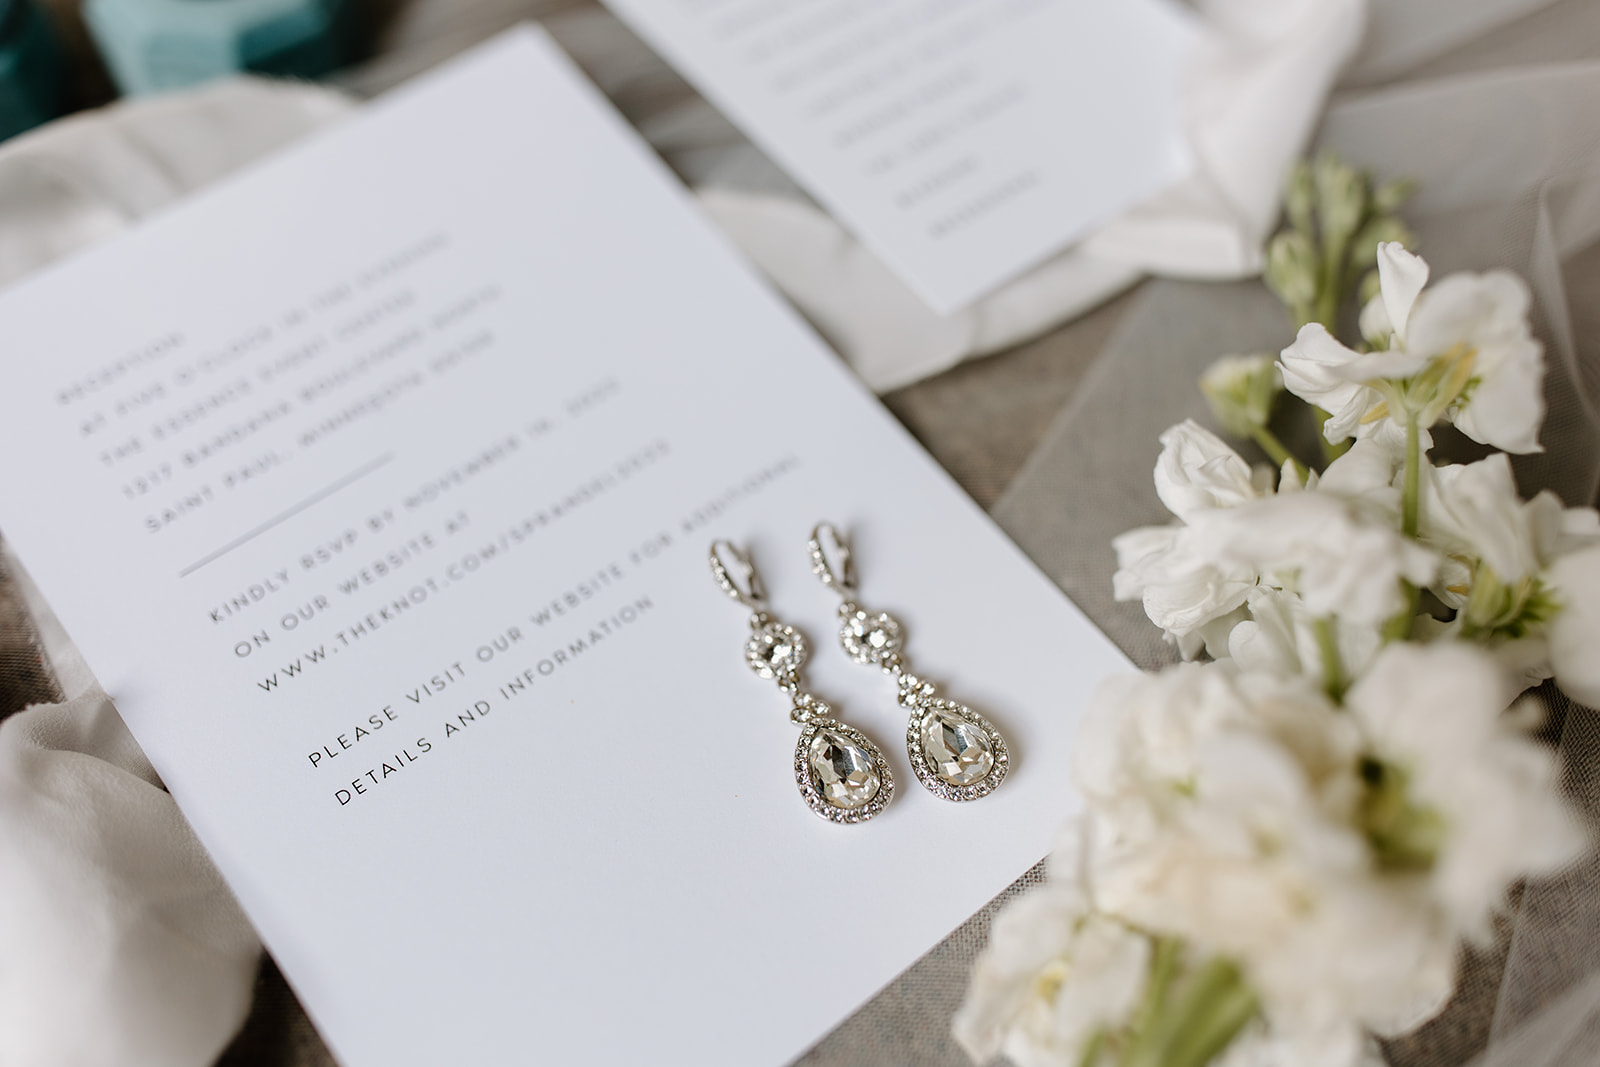 Flat lay of wedding invitations, jewelry, and shoes.